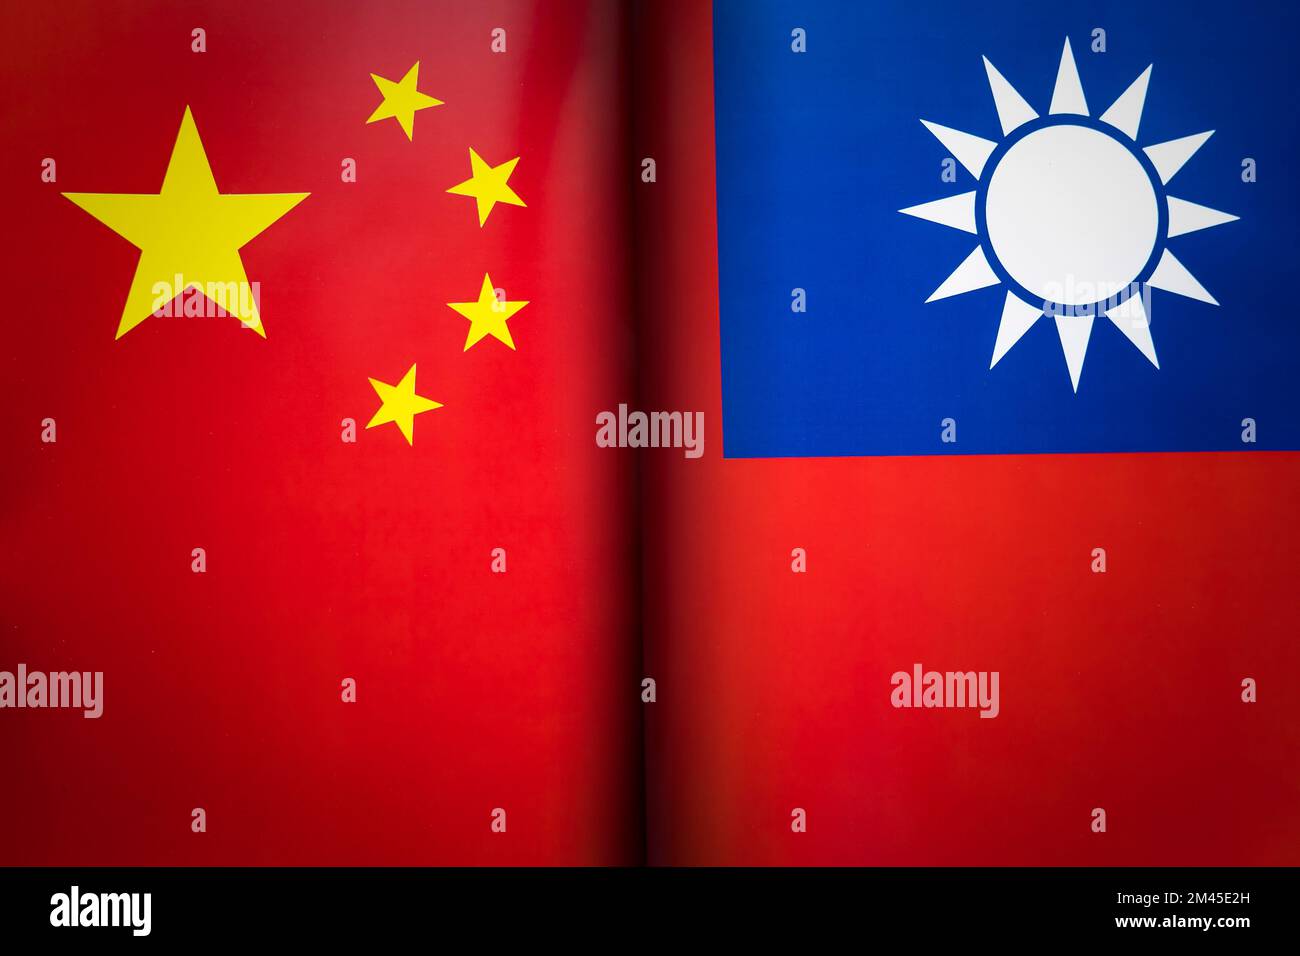 Background of the flags of the taiwan and china. The concept of interaction or counteraction between the two countries. International relations. polit Stock Photo